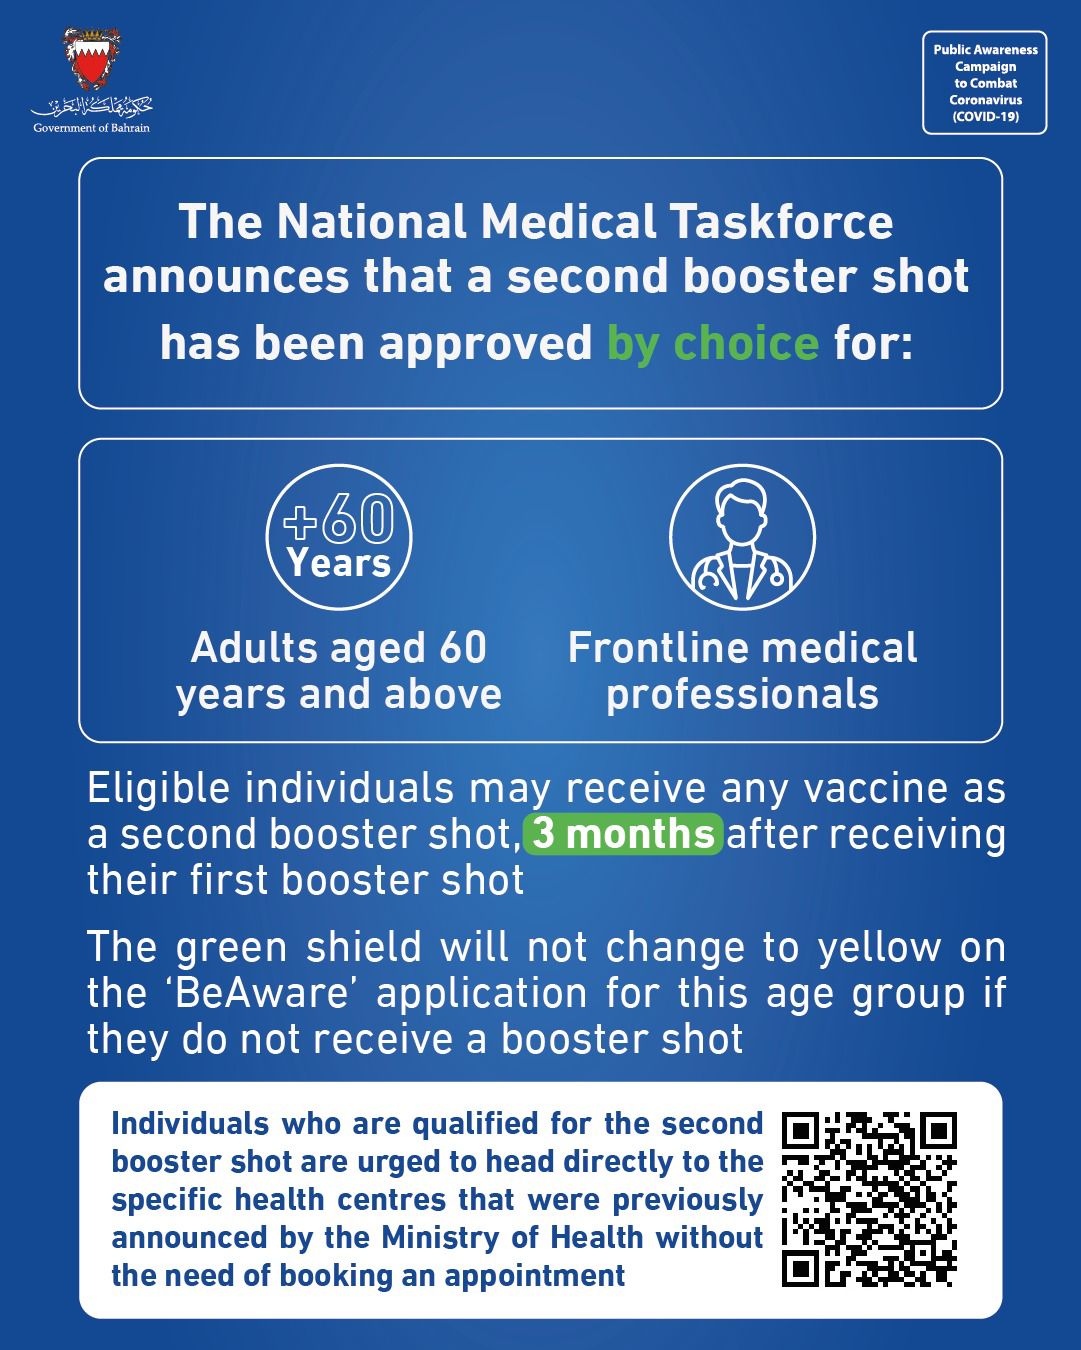 Second booster shot made available by choice  for frontline medical professionals and adults aged 60 years and above: 03 February 2022